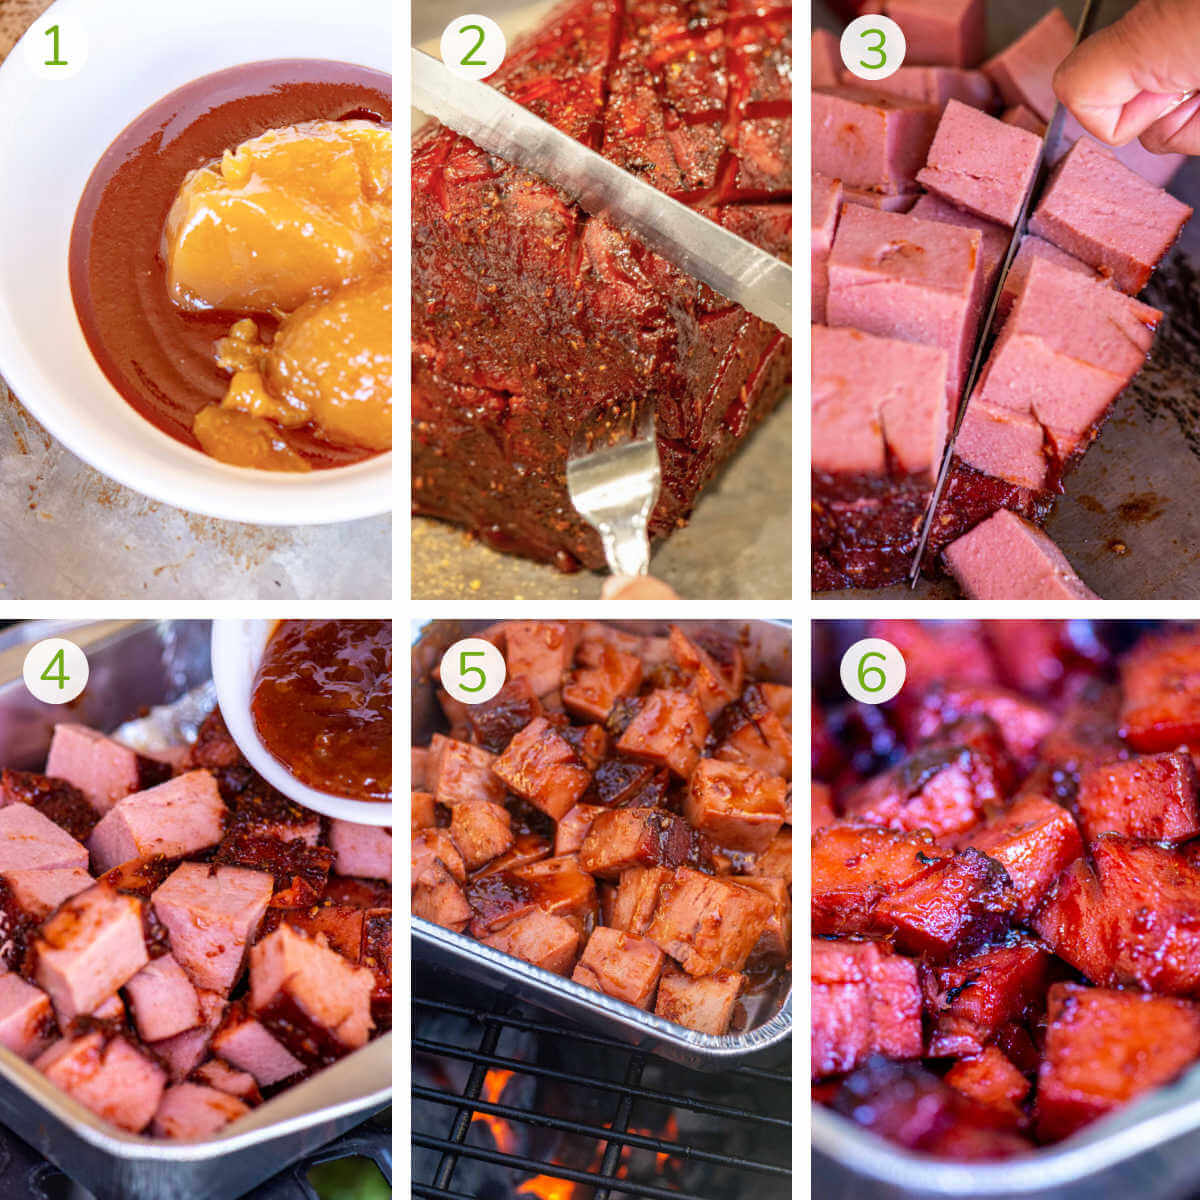 six provess photos showing how to make the sauce, slice and season the bologna, grill and serve.